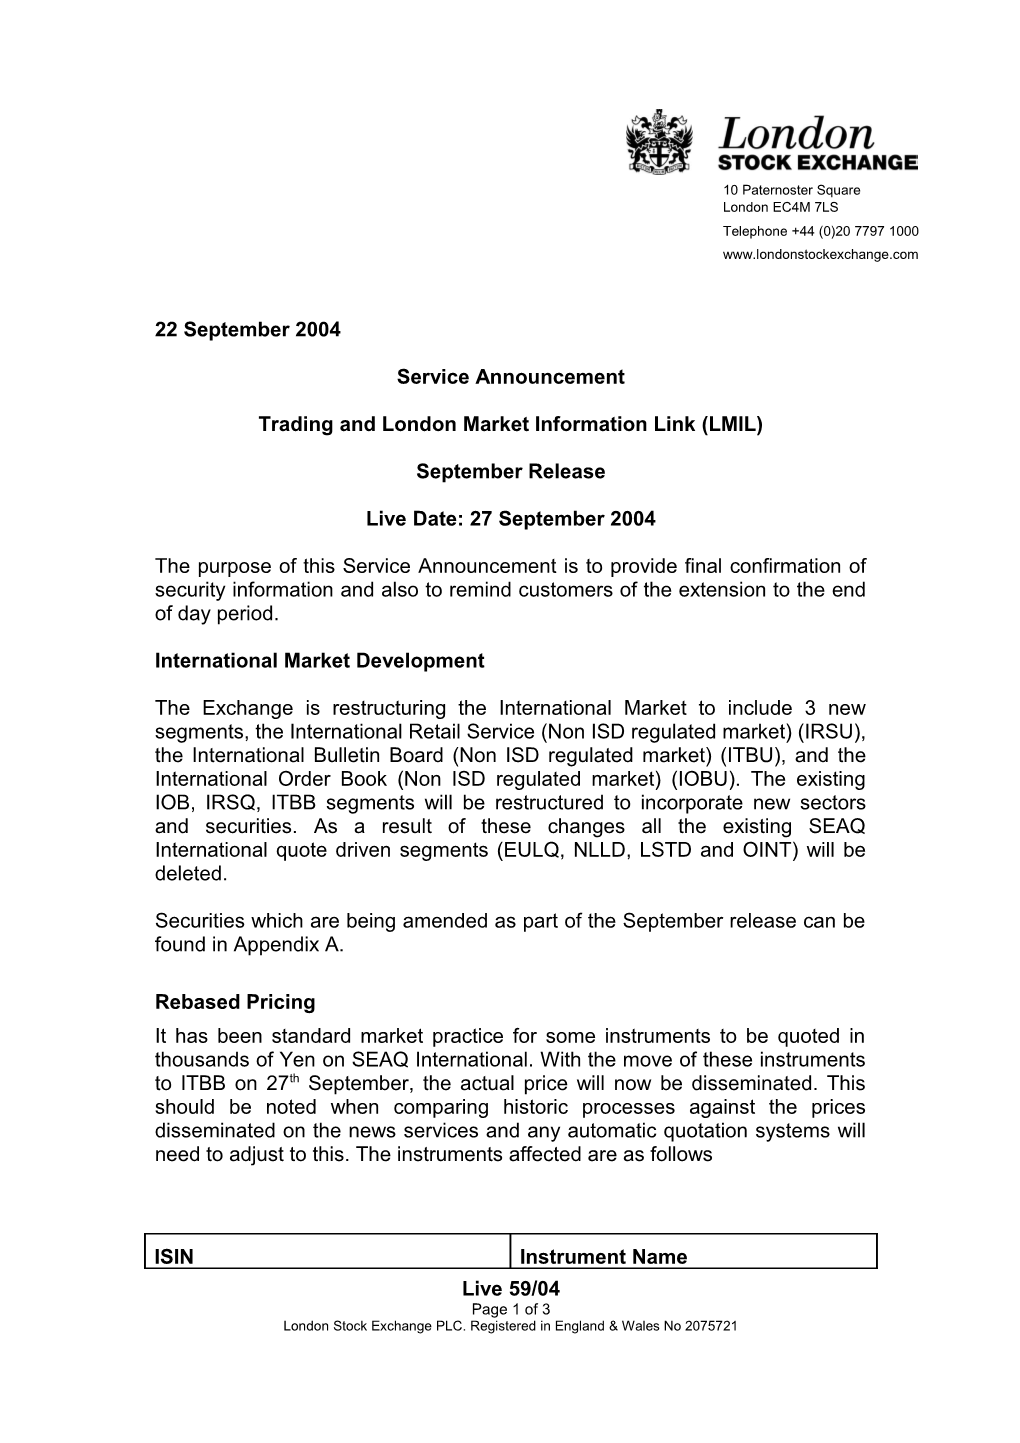 Trading and London Market Information Link (LMIL)